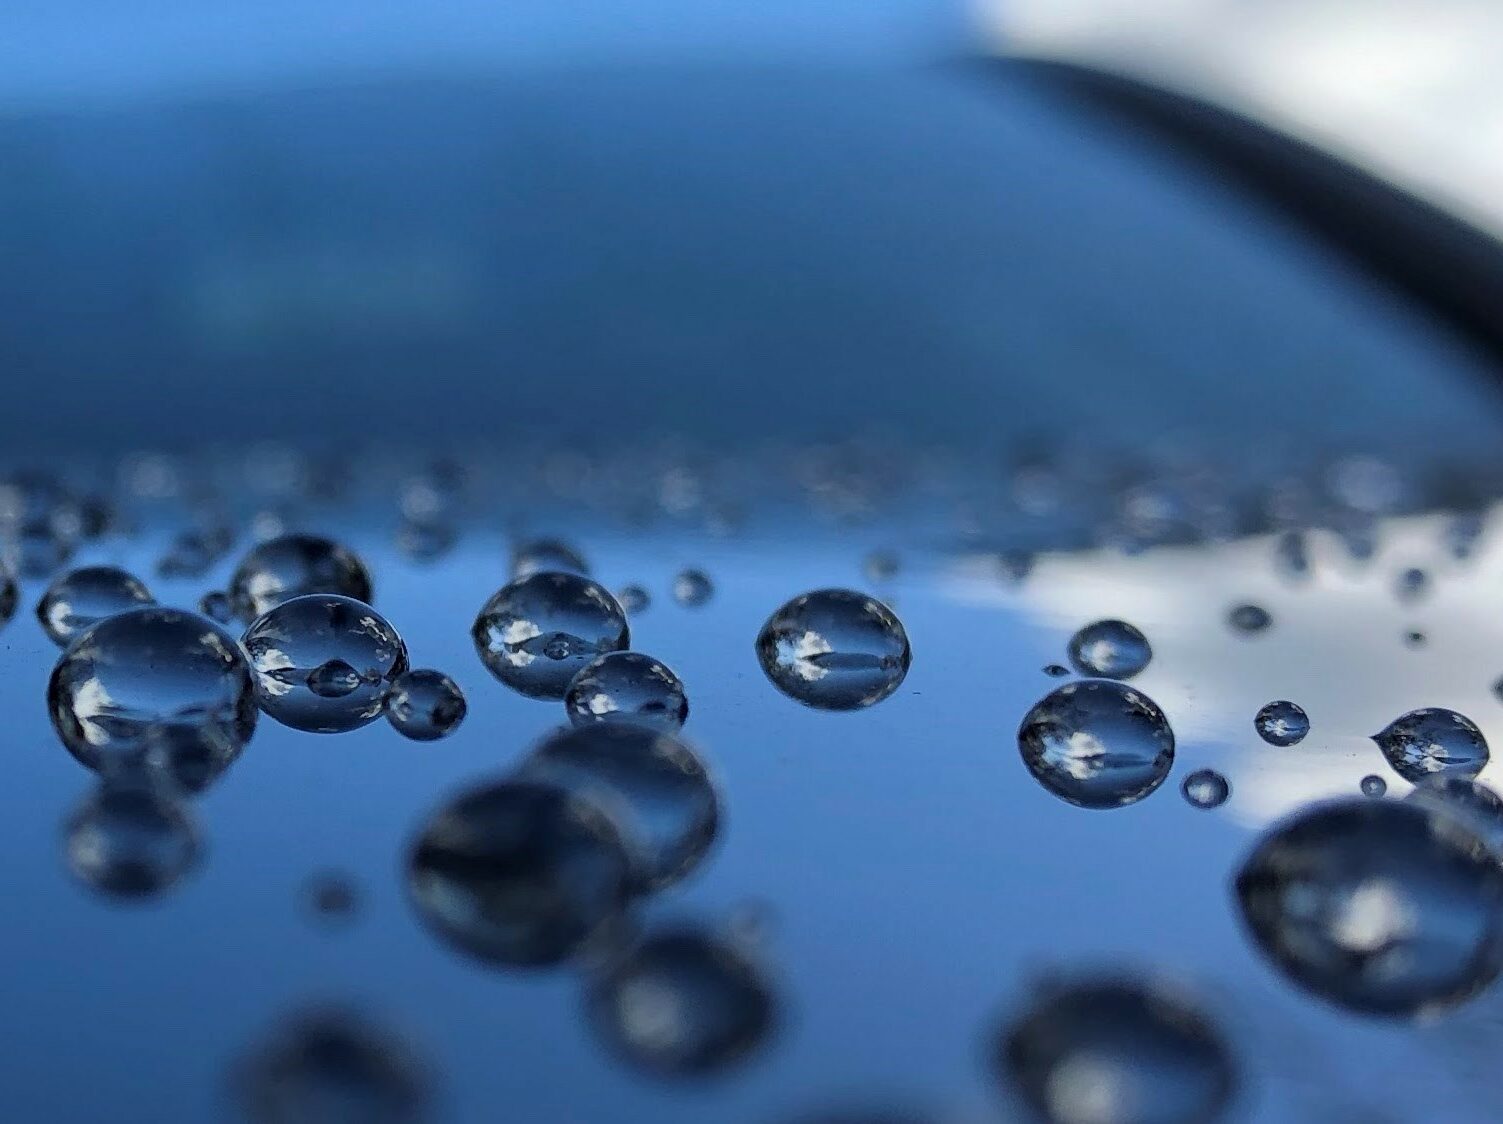 Water beads on car body panel